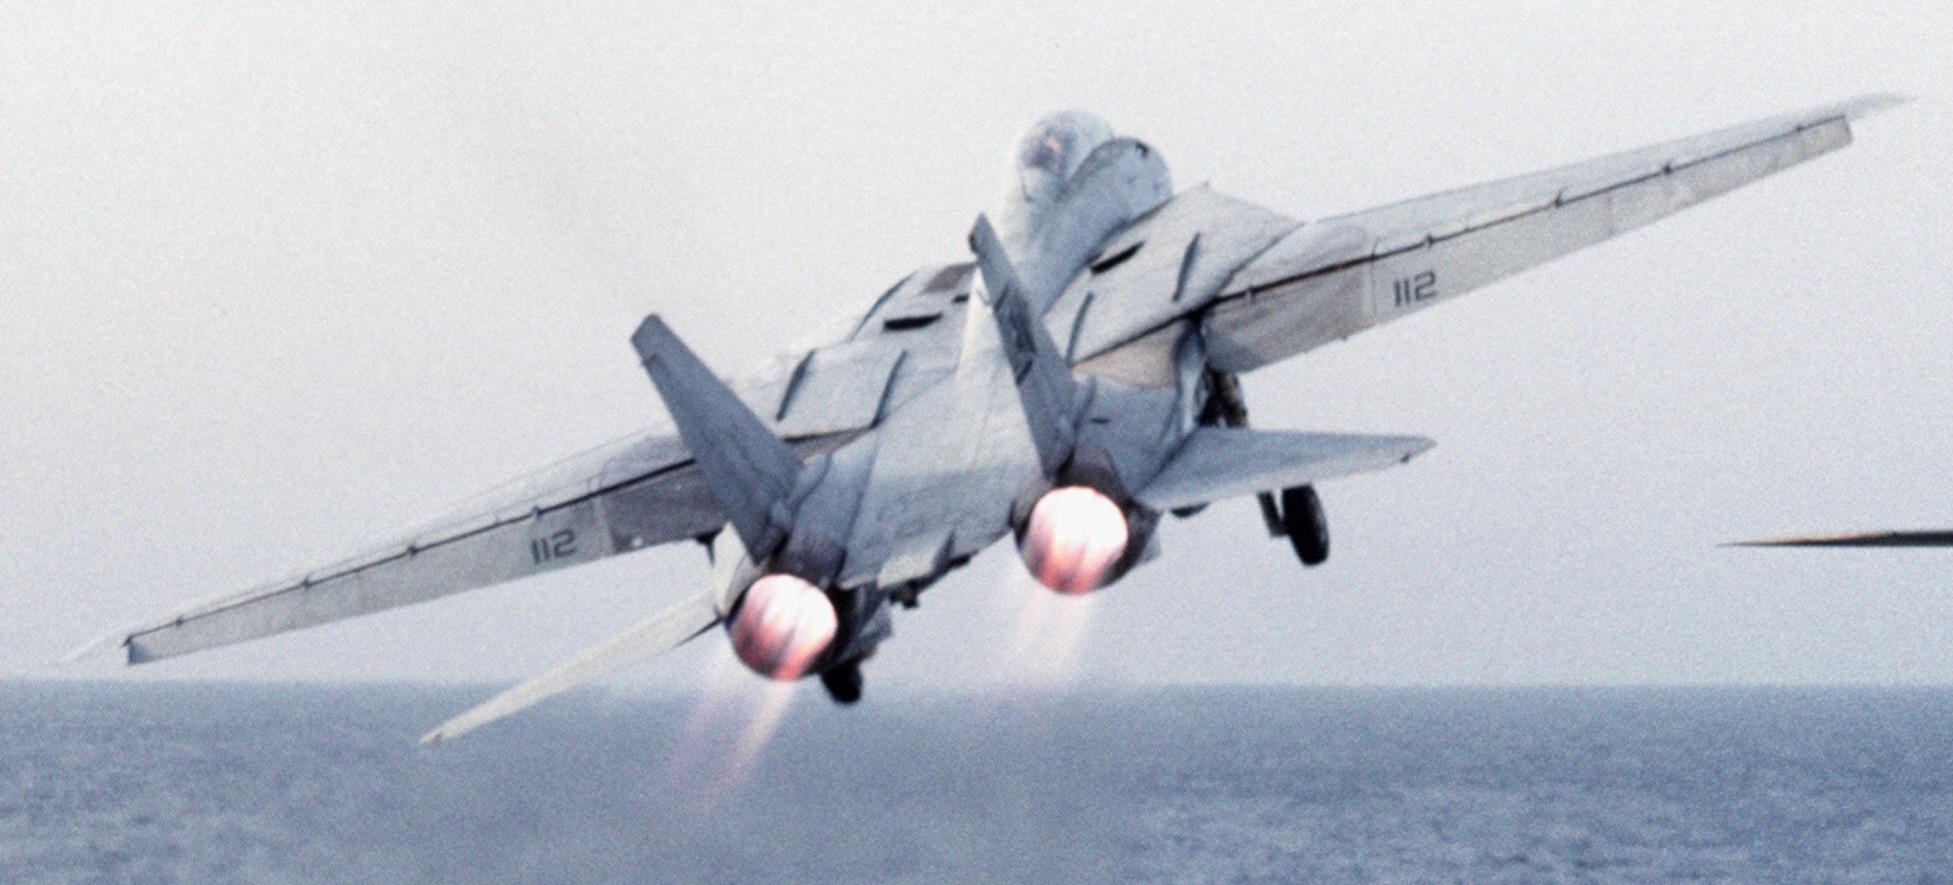 vf-1 wolfpack fighter squadron f-14a tomcat carrier air wing cvw-2 uss ranger cv-61 67